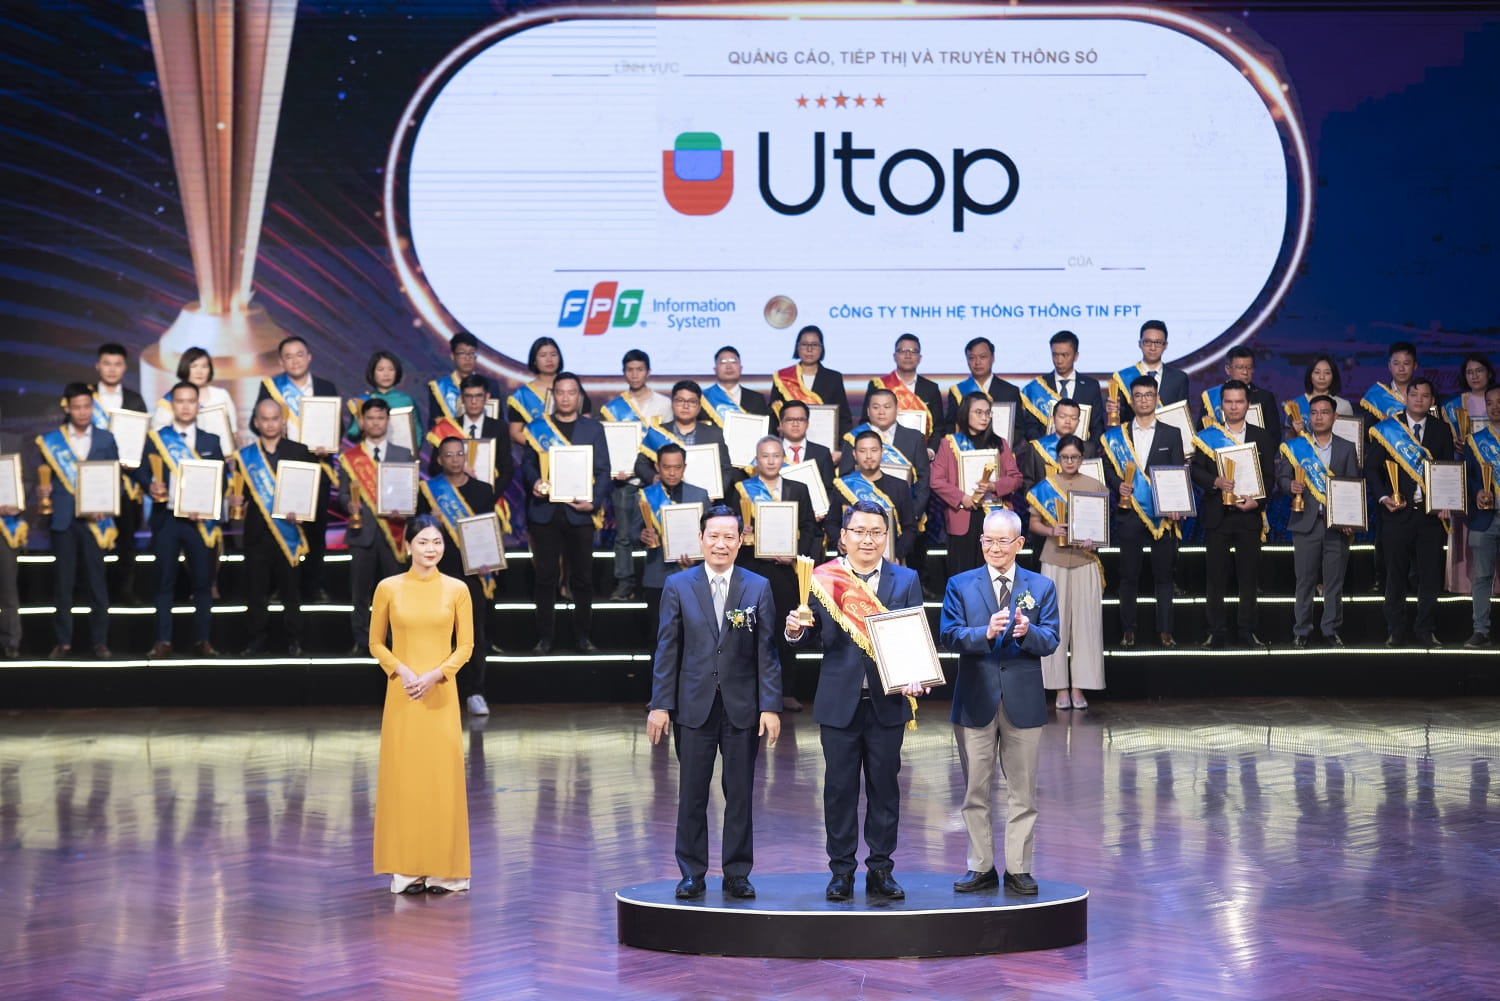 Utop LoyaltyOS has achieved a 5-star certification.